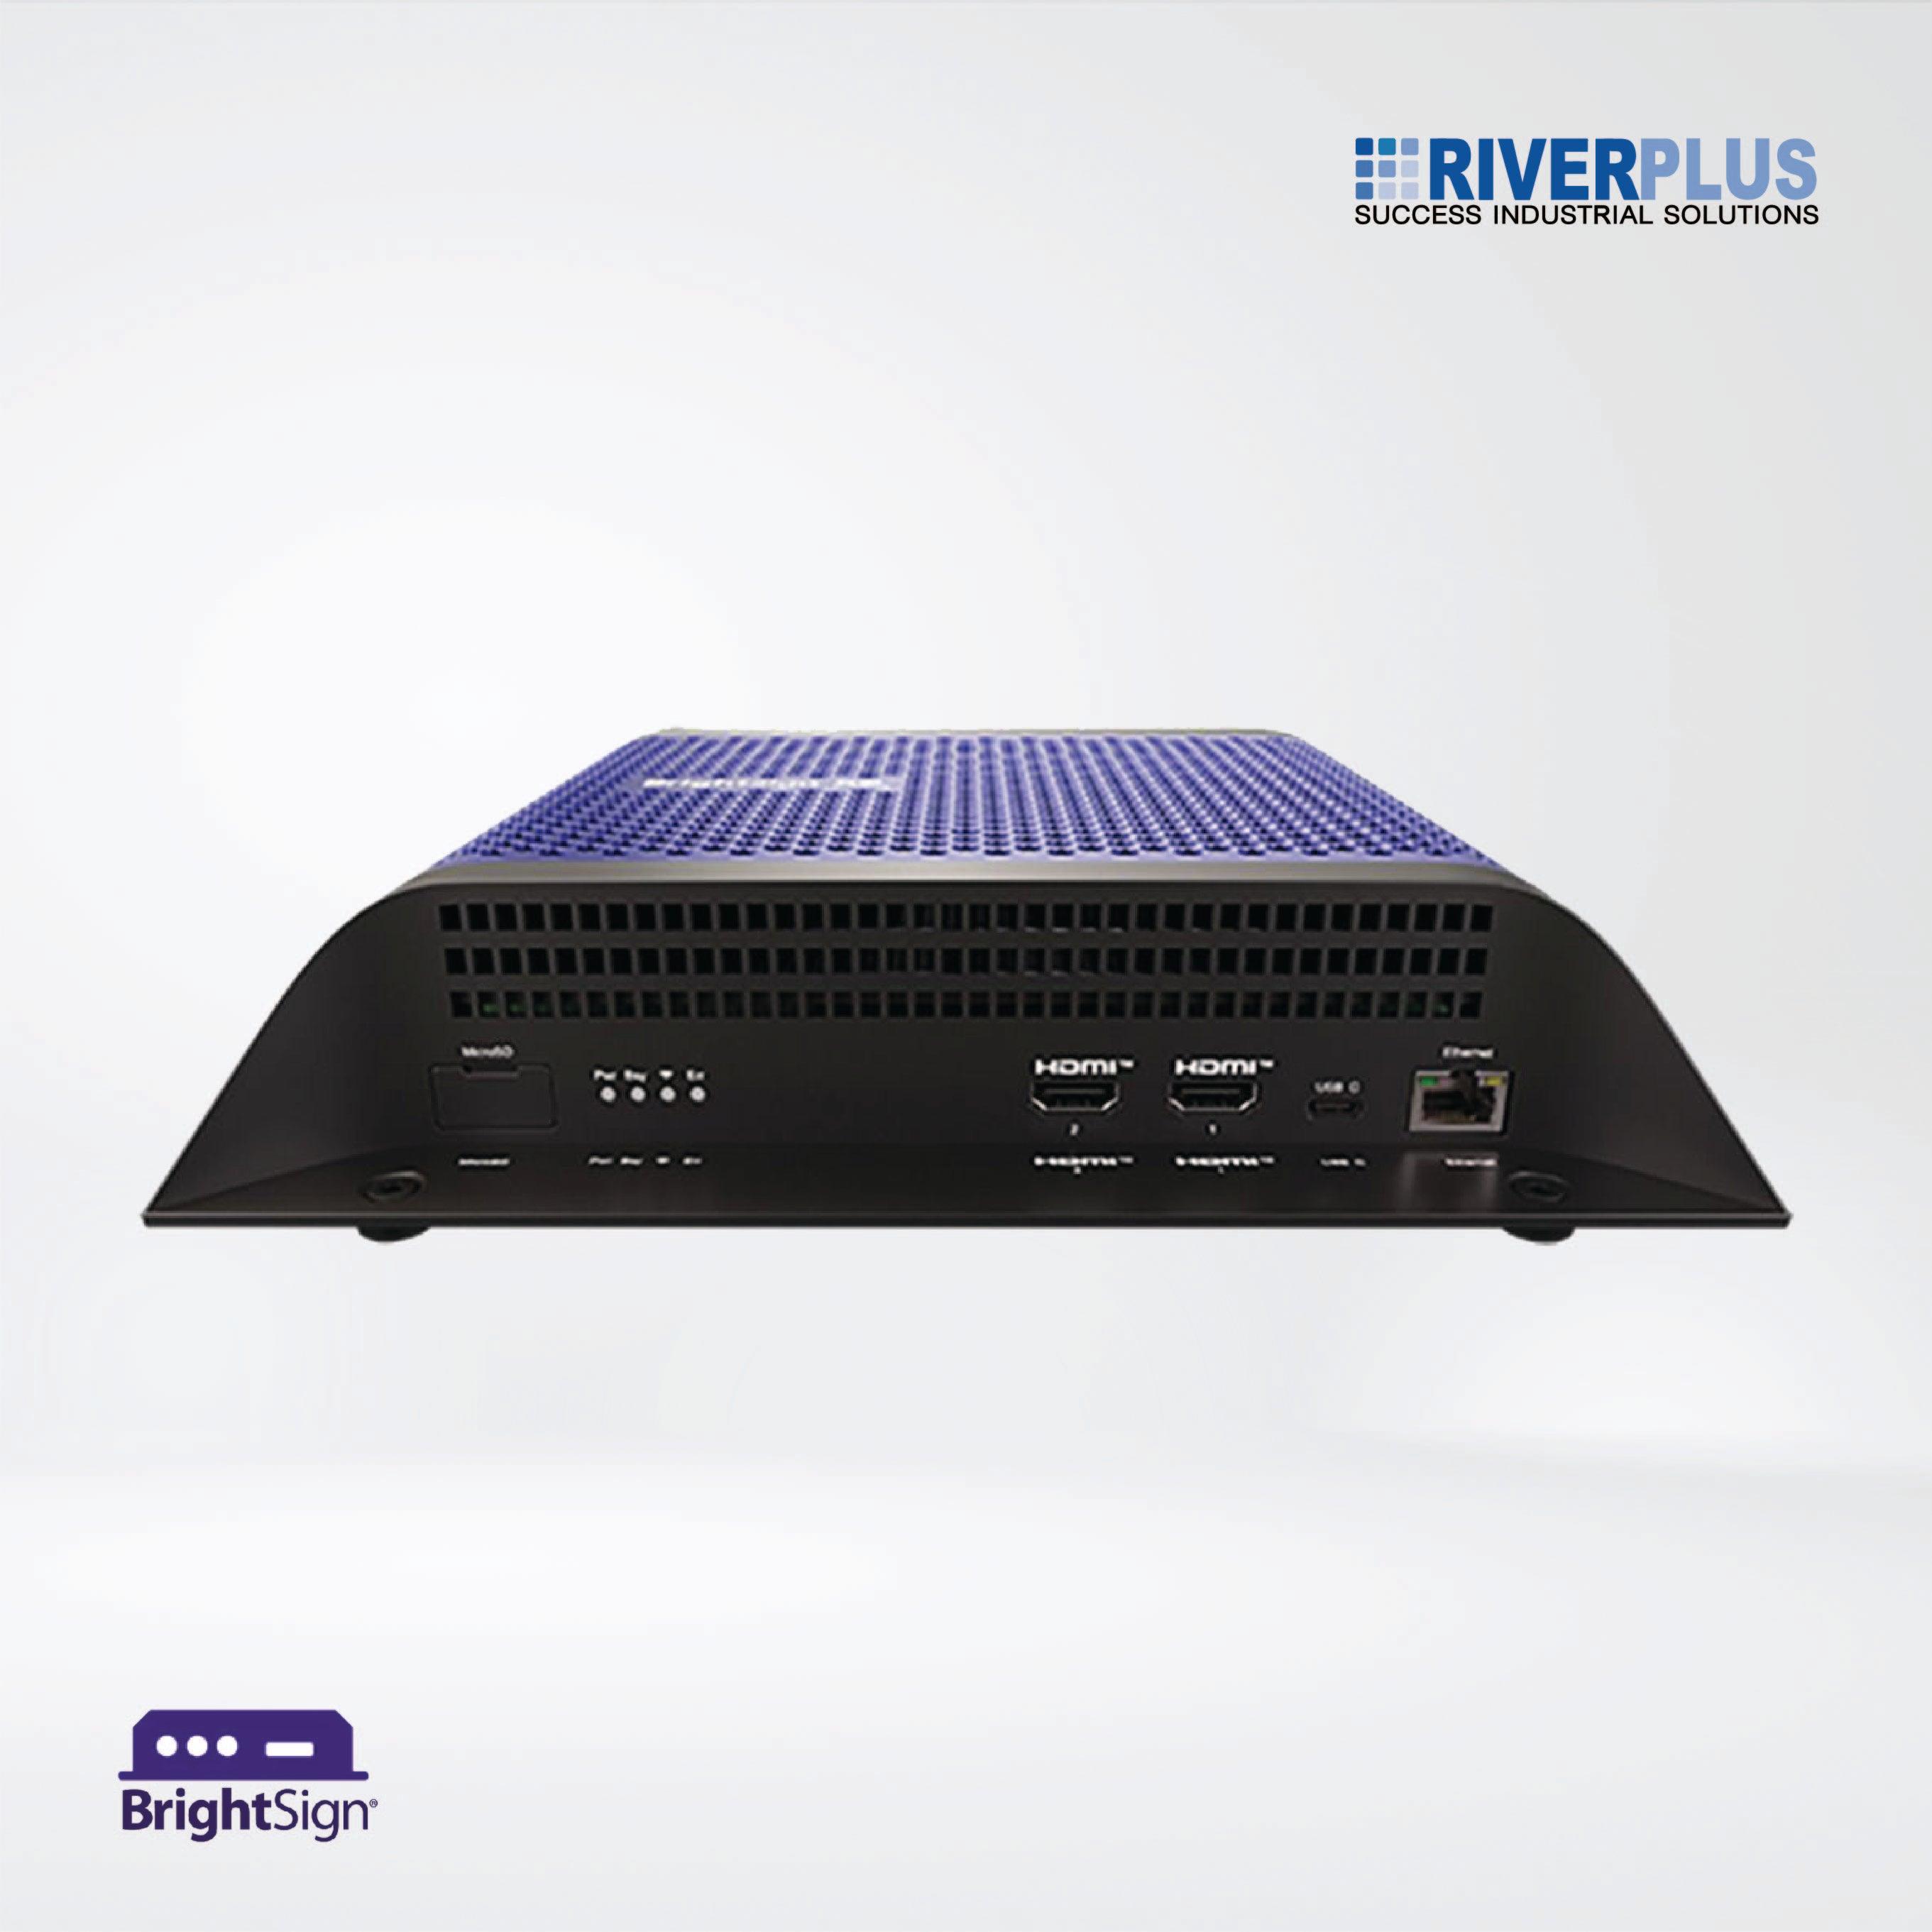 XC2055 EXPERT PLAYER 8K, dual HDMI output player with PC class HTML performance + 64GB Micro SD - Riverplus